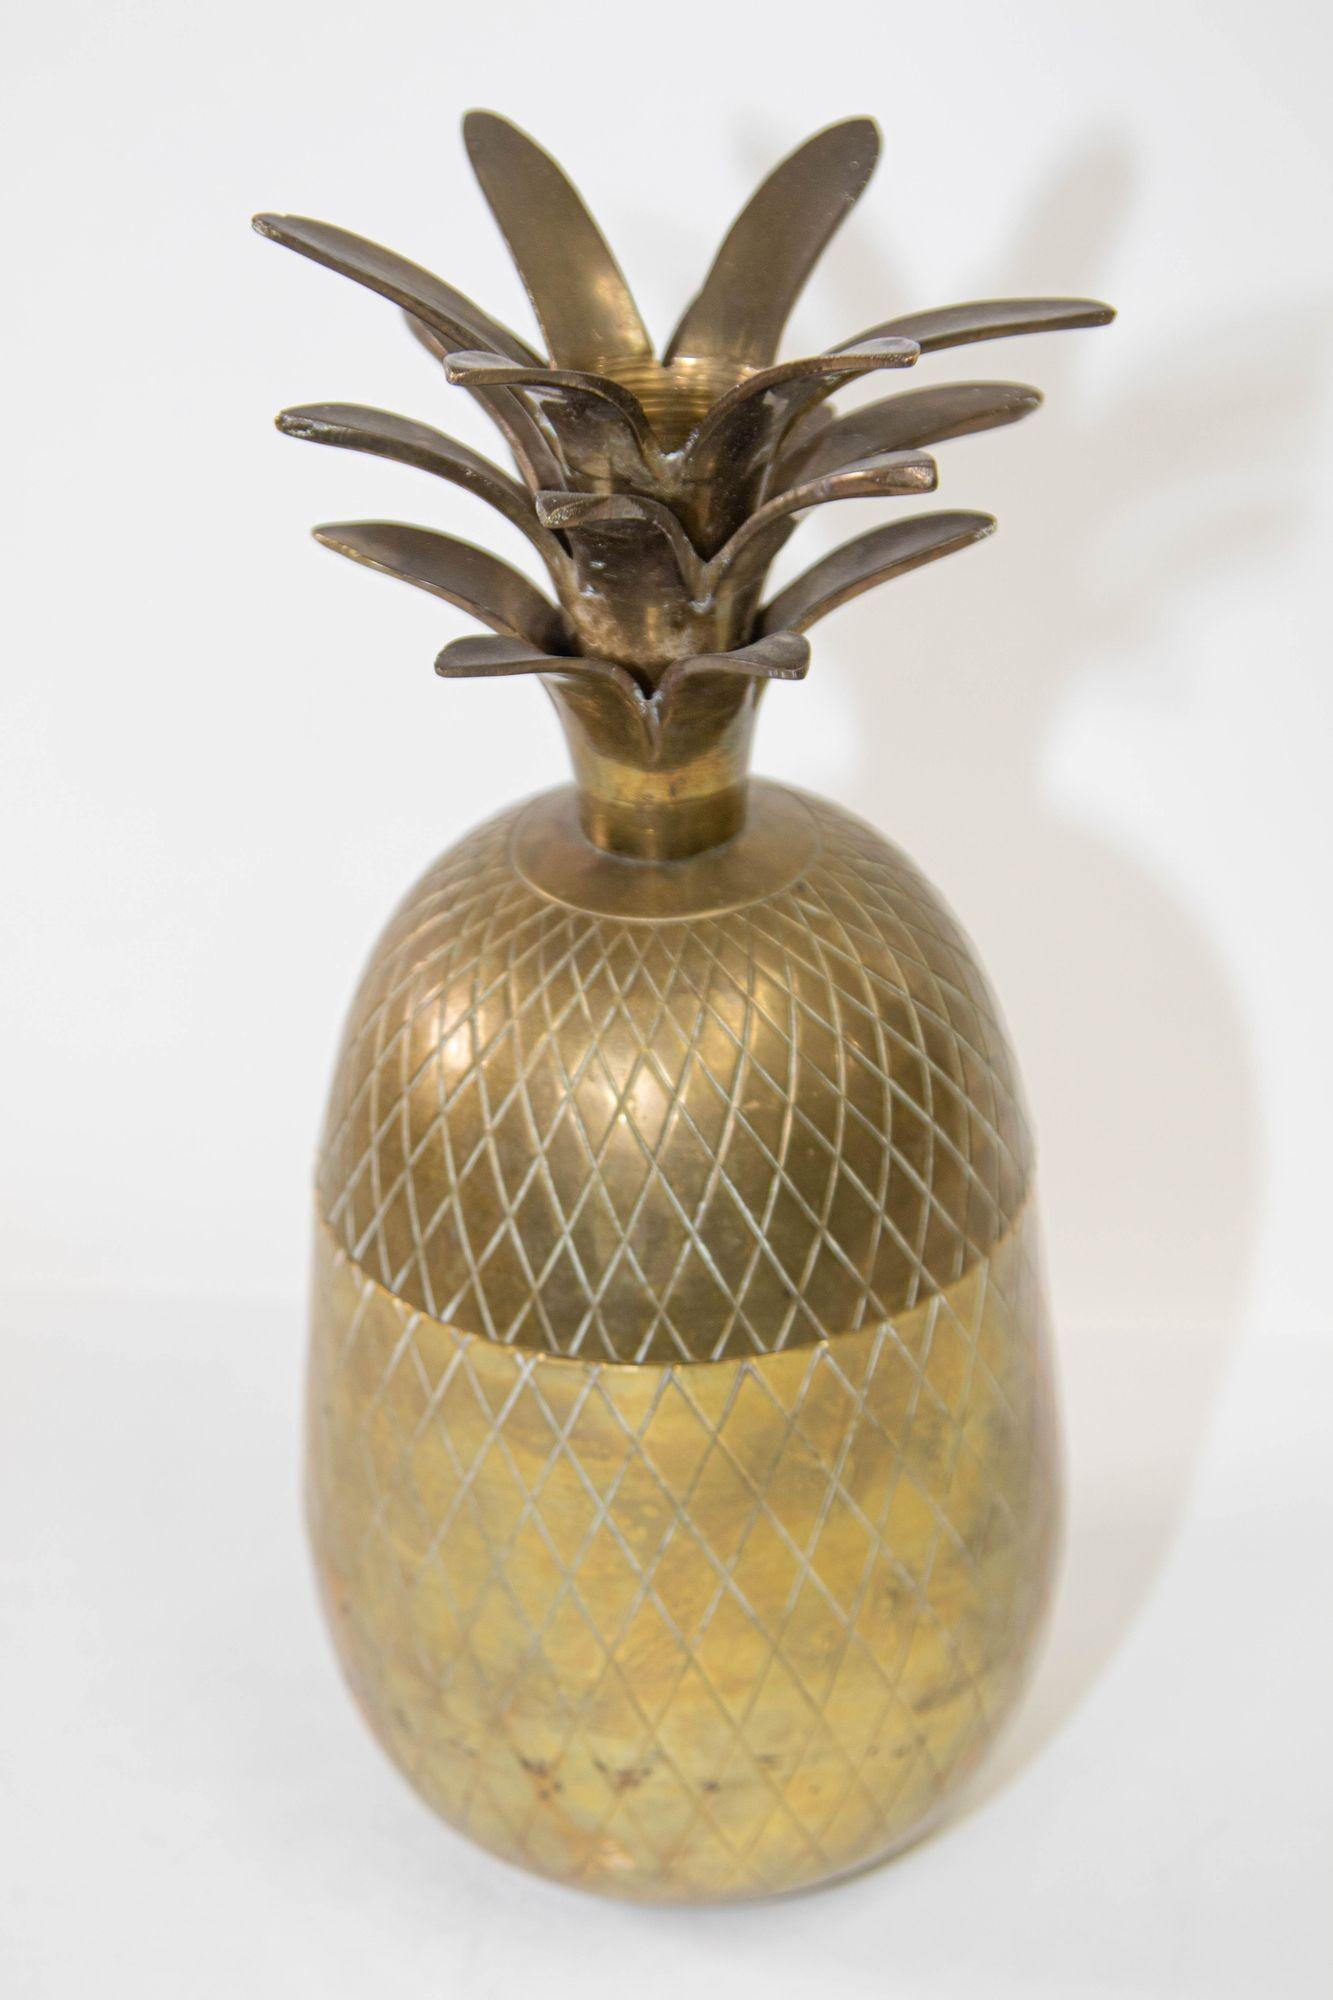 Vintage decorative lidded ice bucket in the shape of pineapple will brighten your table.
Gold tone solid brass pineapple shape jar with lid.
Midcentury brass ice bucket with an ovoid shape with an engraved trellis pattern.
Fine craftsmanship solid